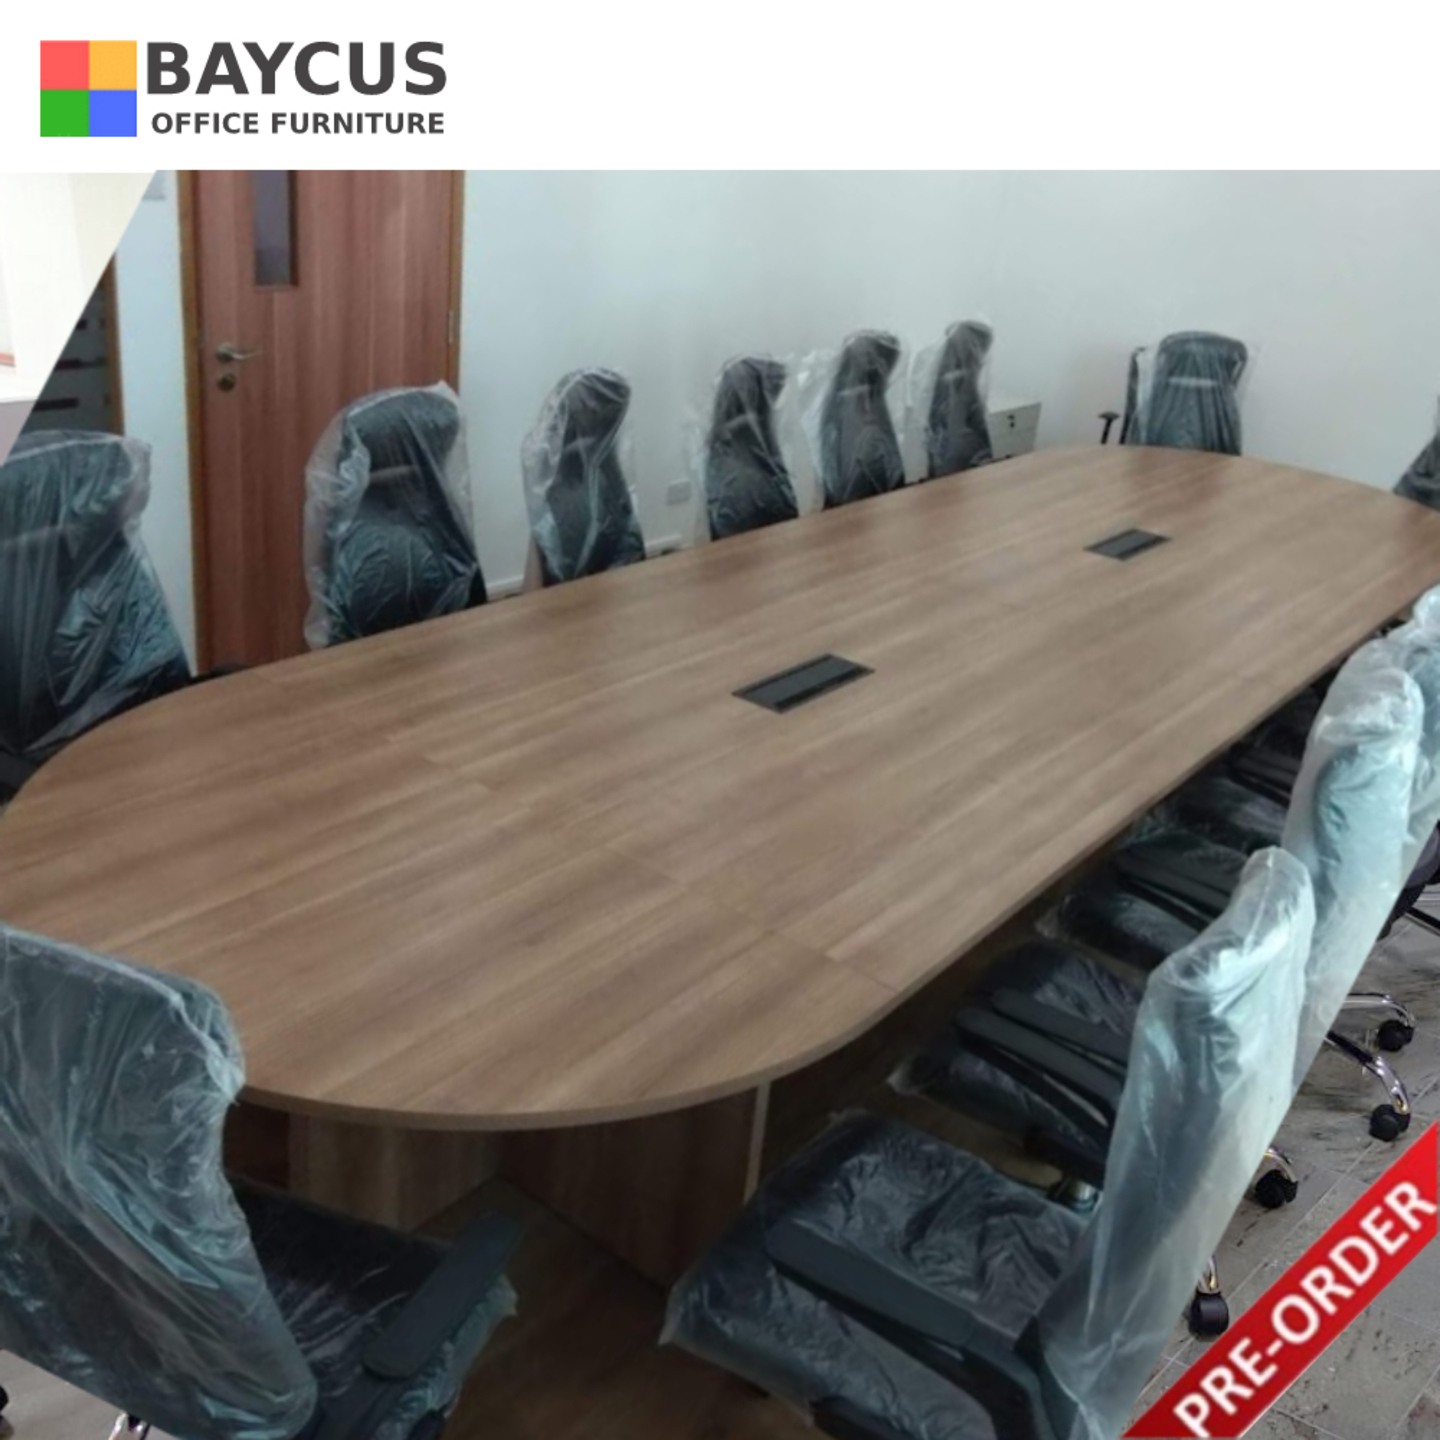 Baycus 4.5m Custom Made Conference Table